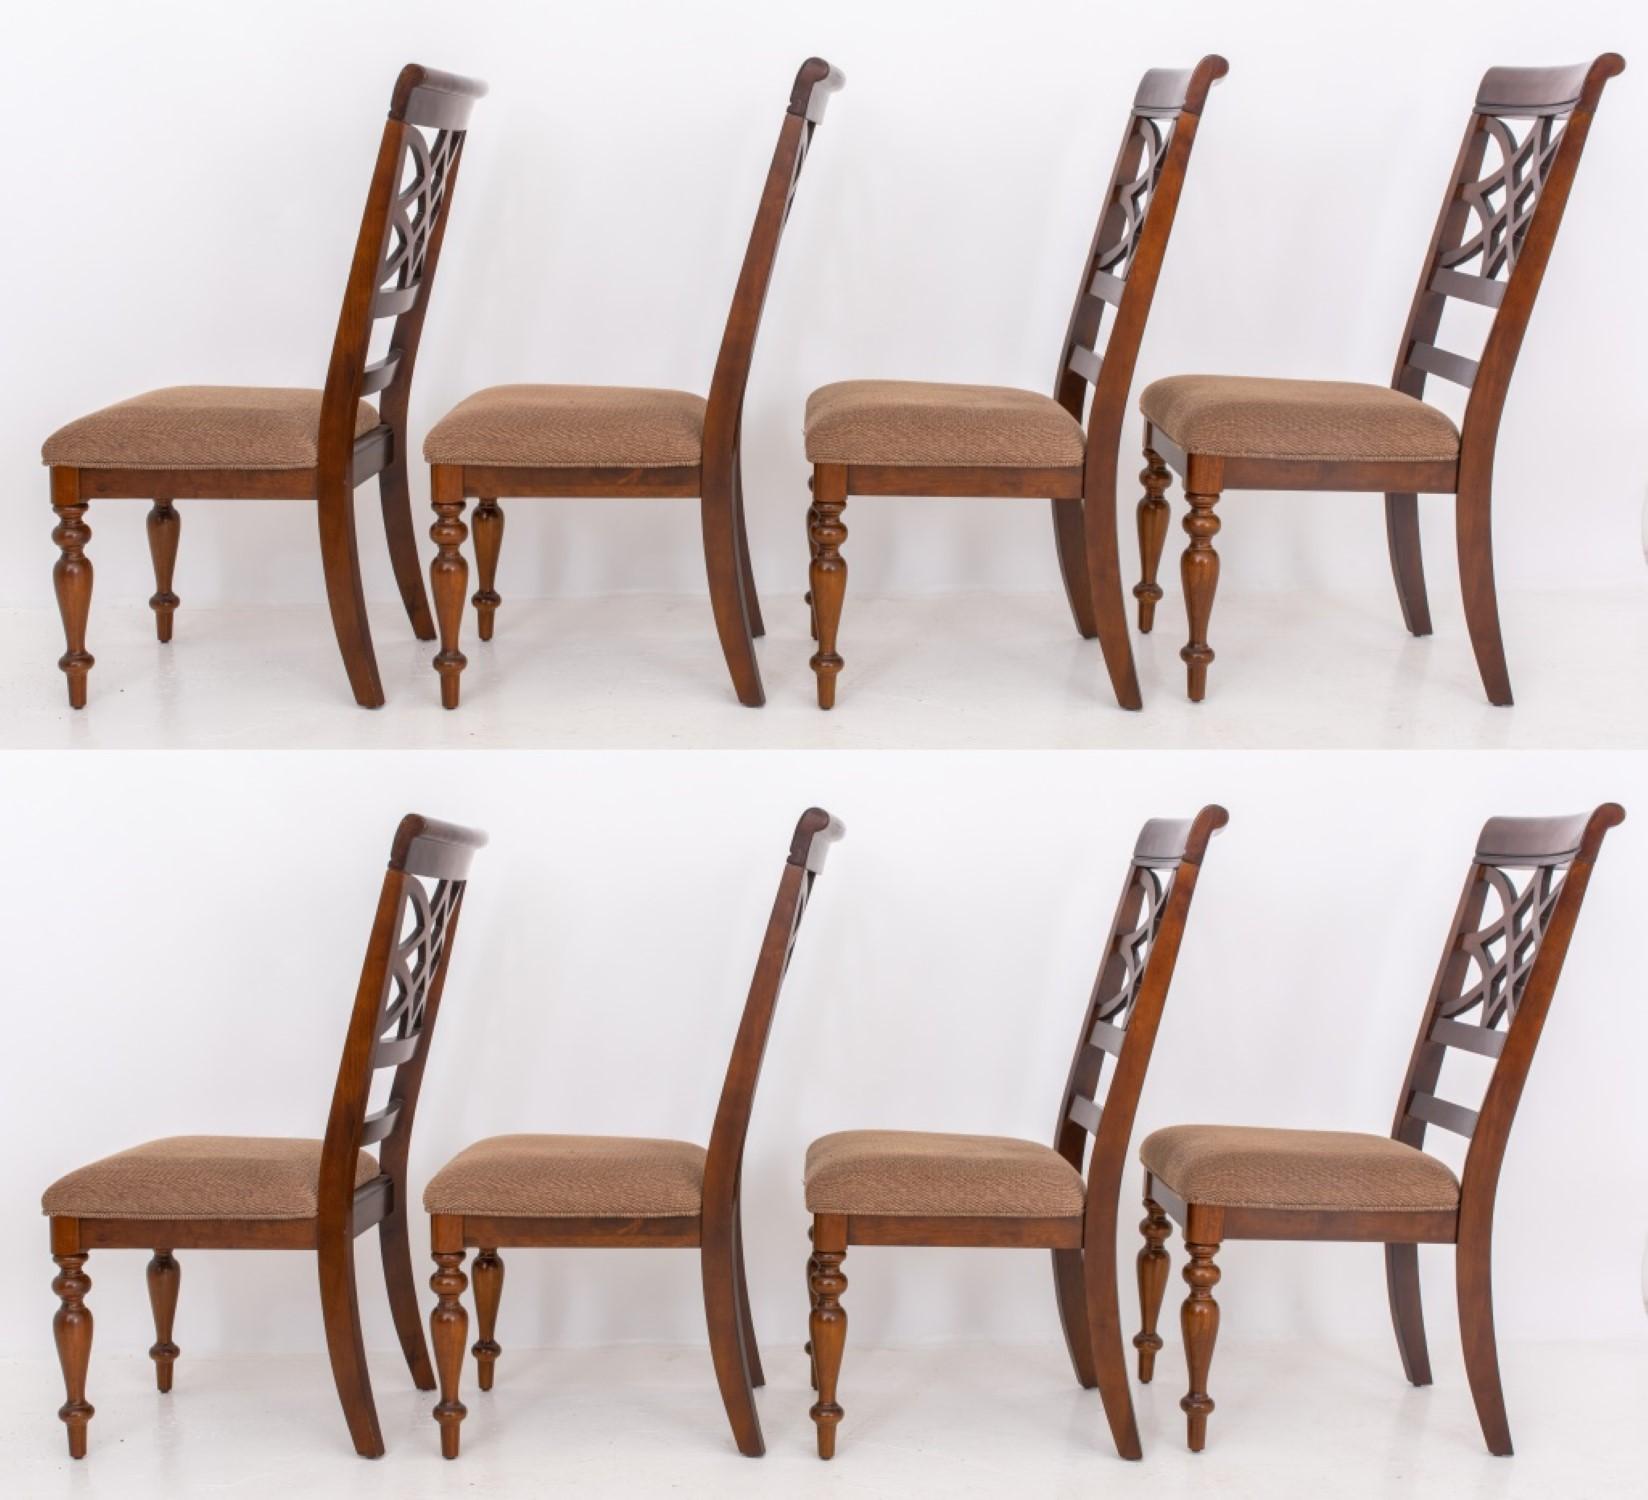 Set of modern dining chairs, eight (8) with reticulated trelliswork backs and upholstered seats on turned legs.

40.5 inches in height, 19 inches in width, 19 inches in depth, with an 18-inch seat.